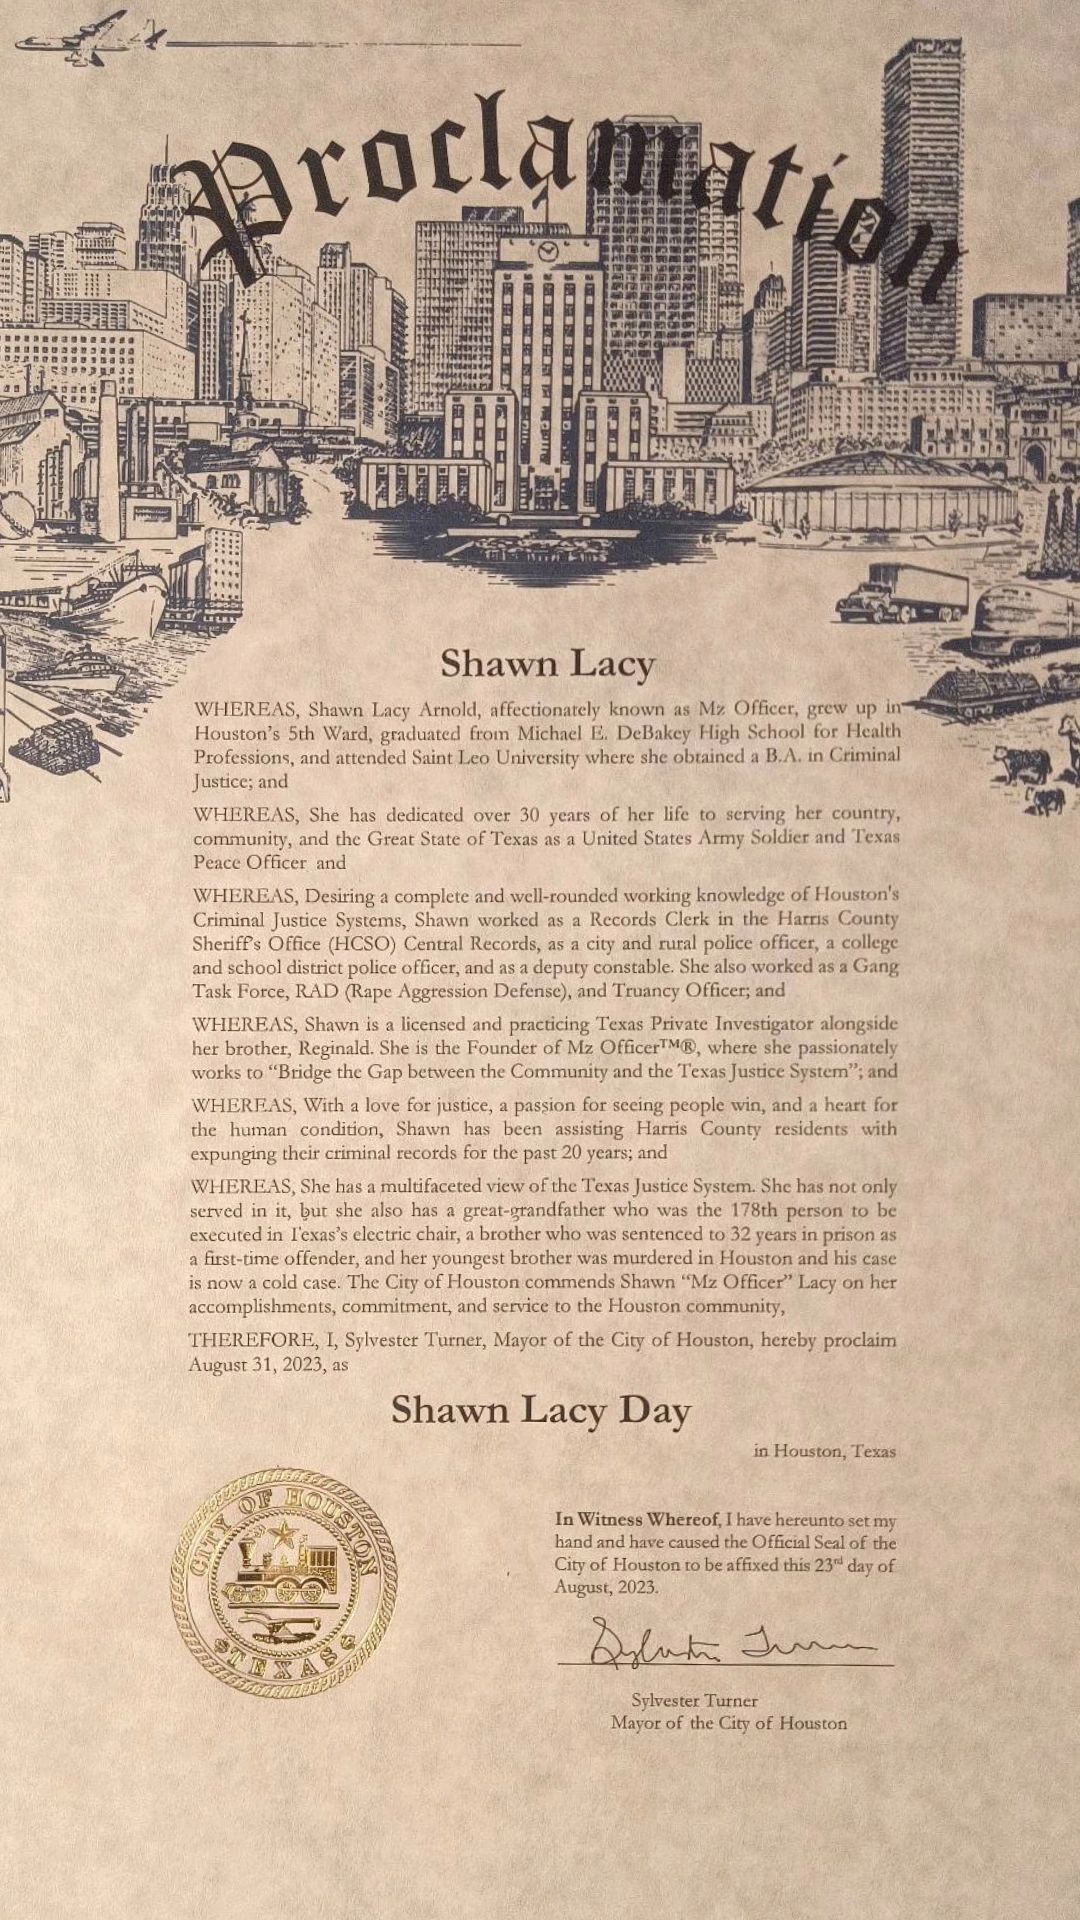 Proclamation declaring "Shawn Lacy Day" in Houston for her community service.